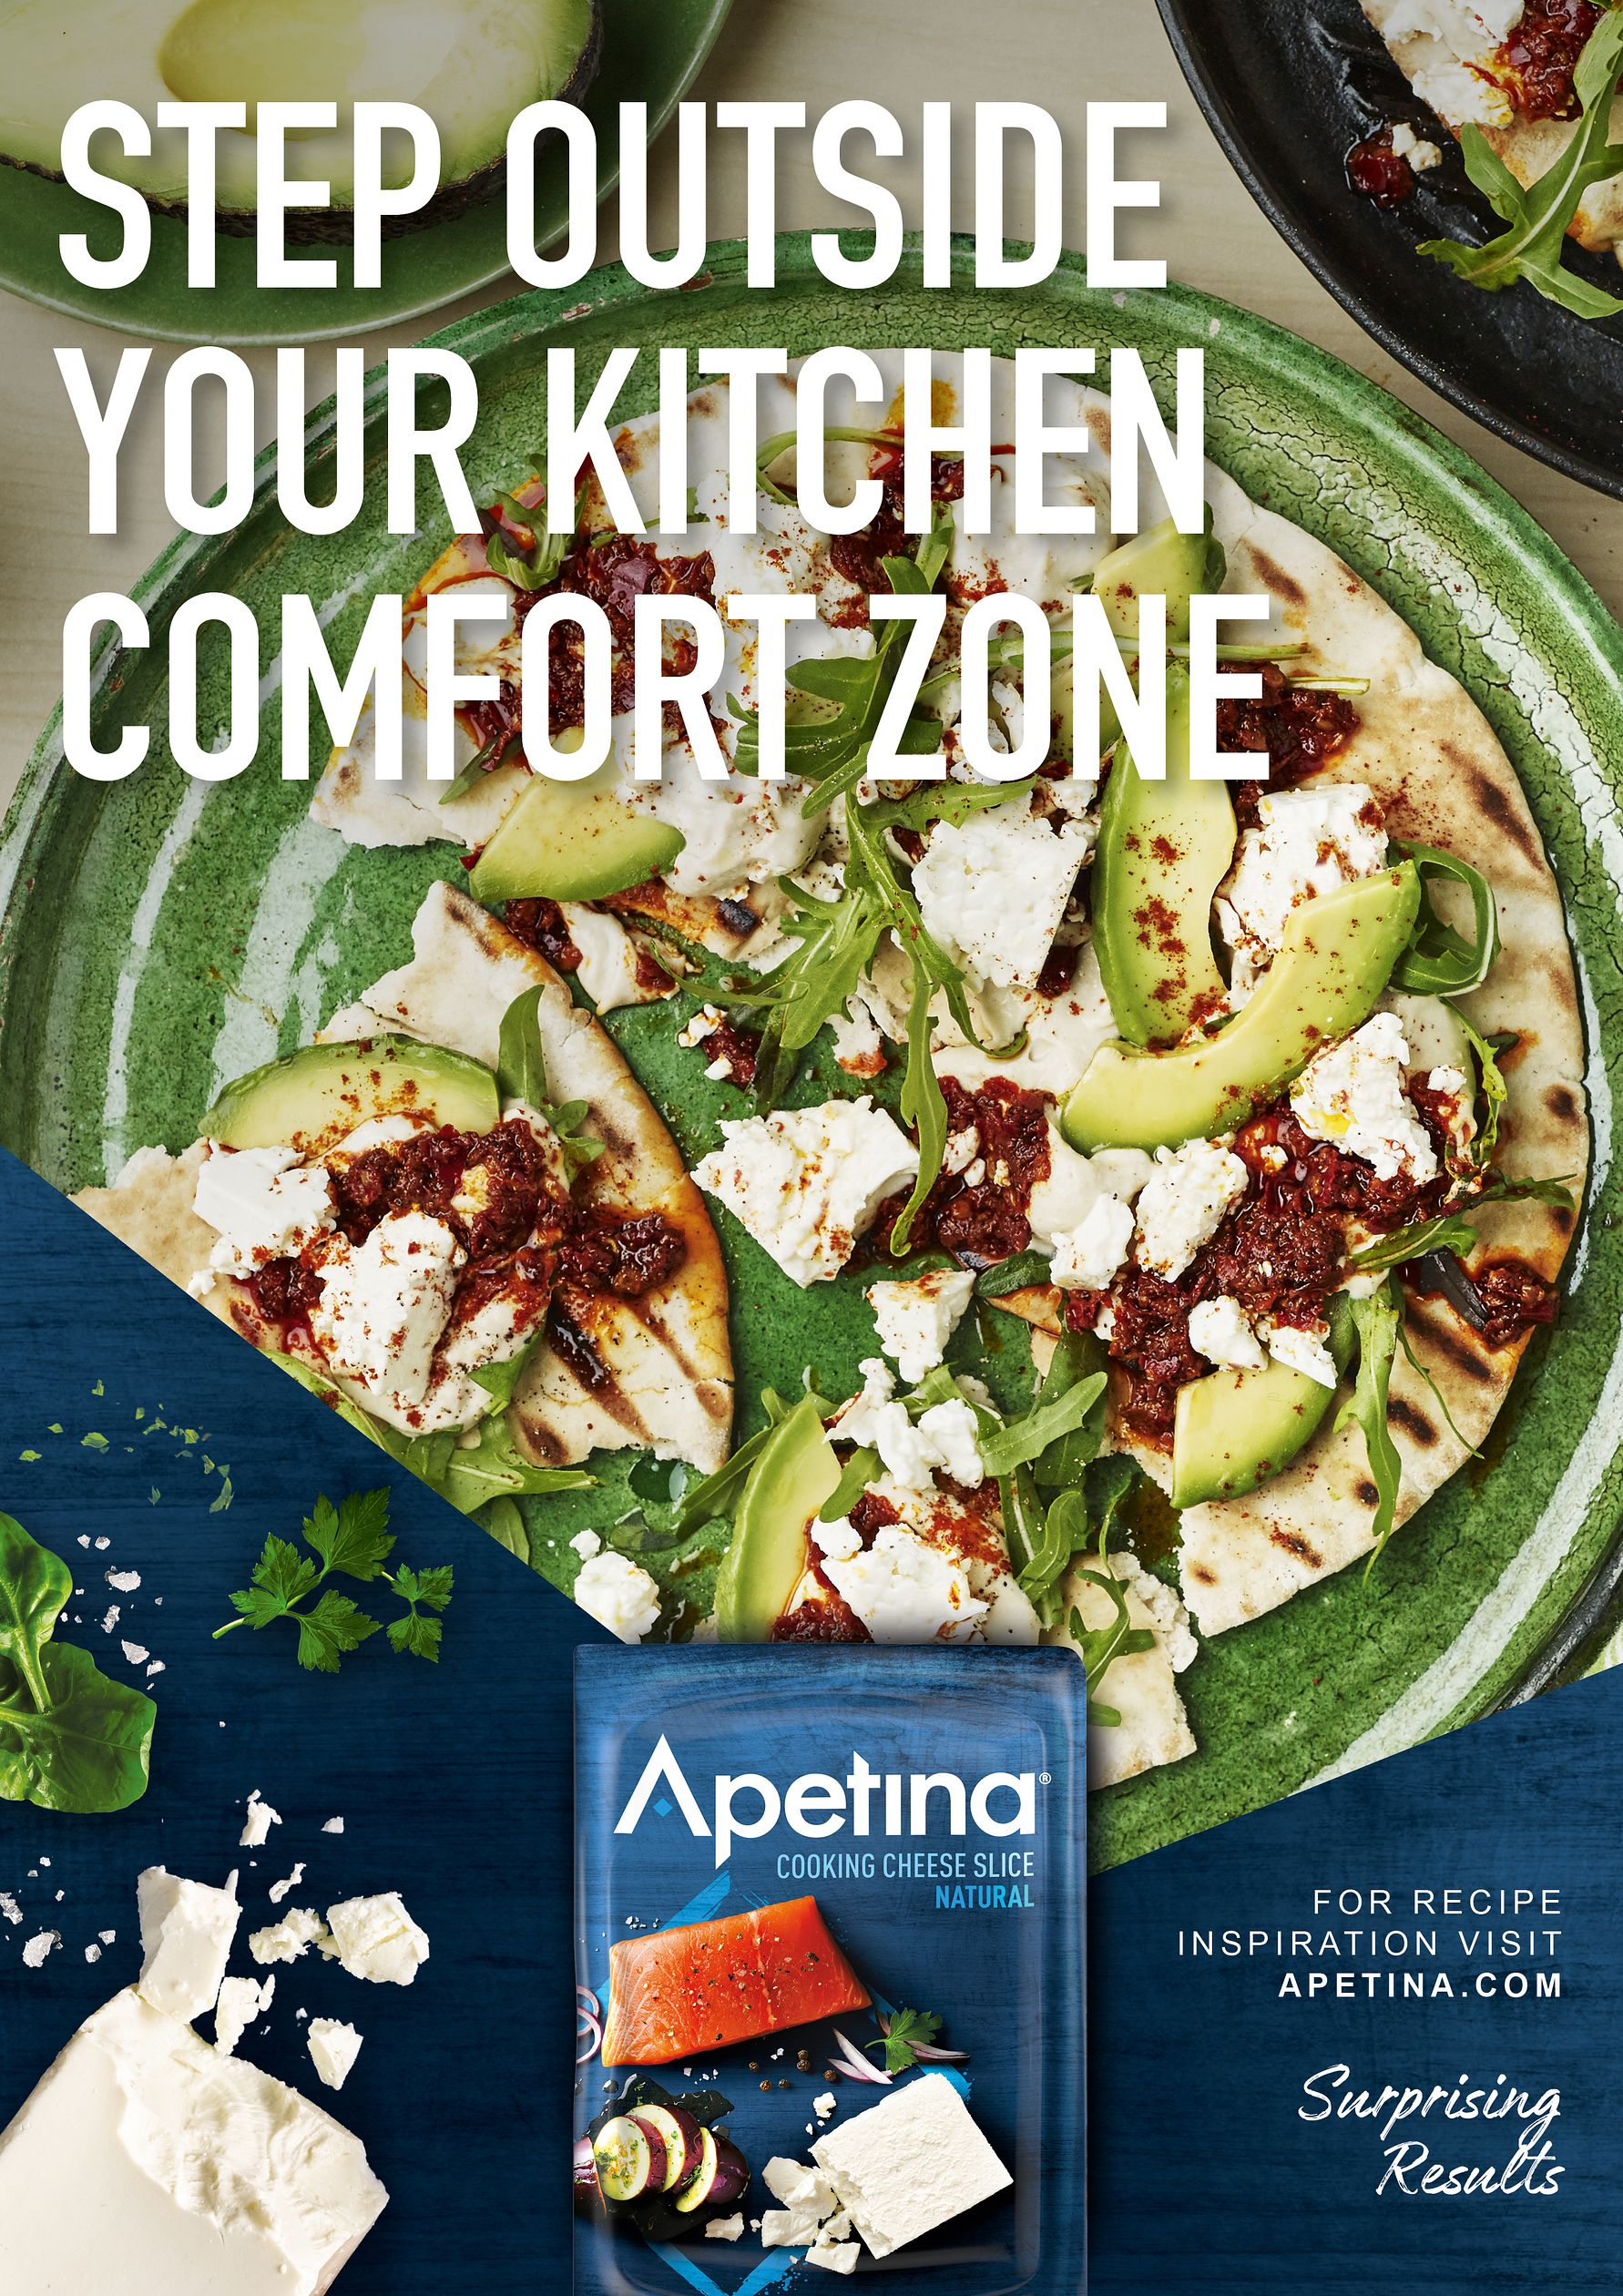 Arla repositions Apetina with radical re-brand